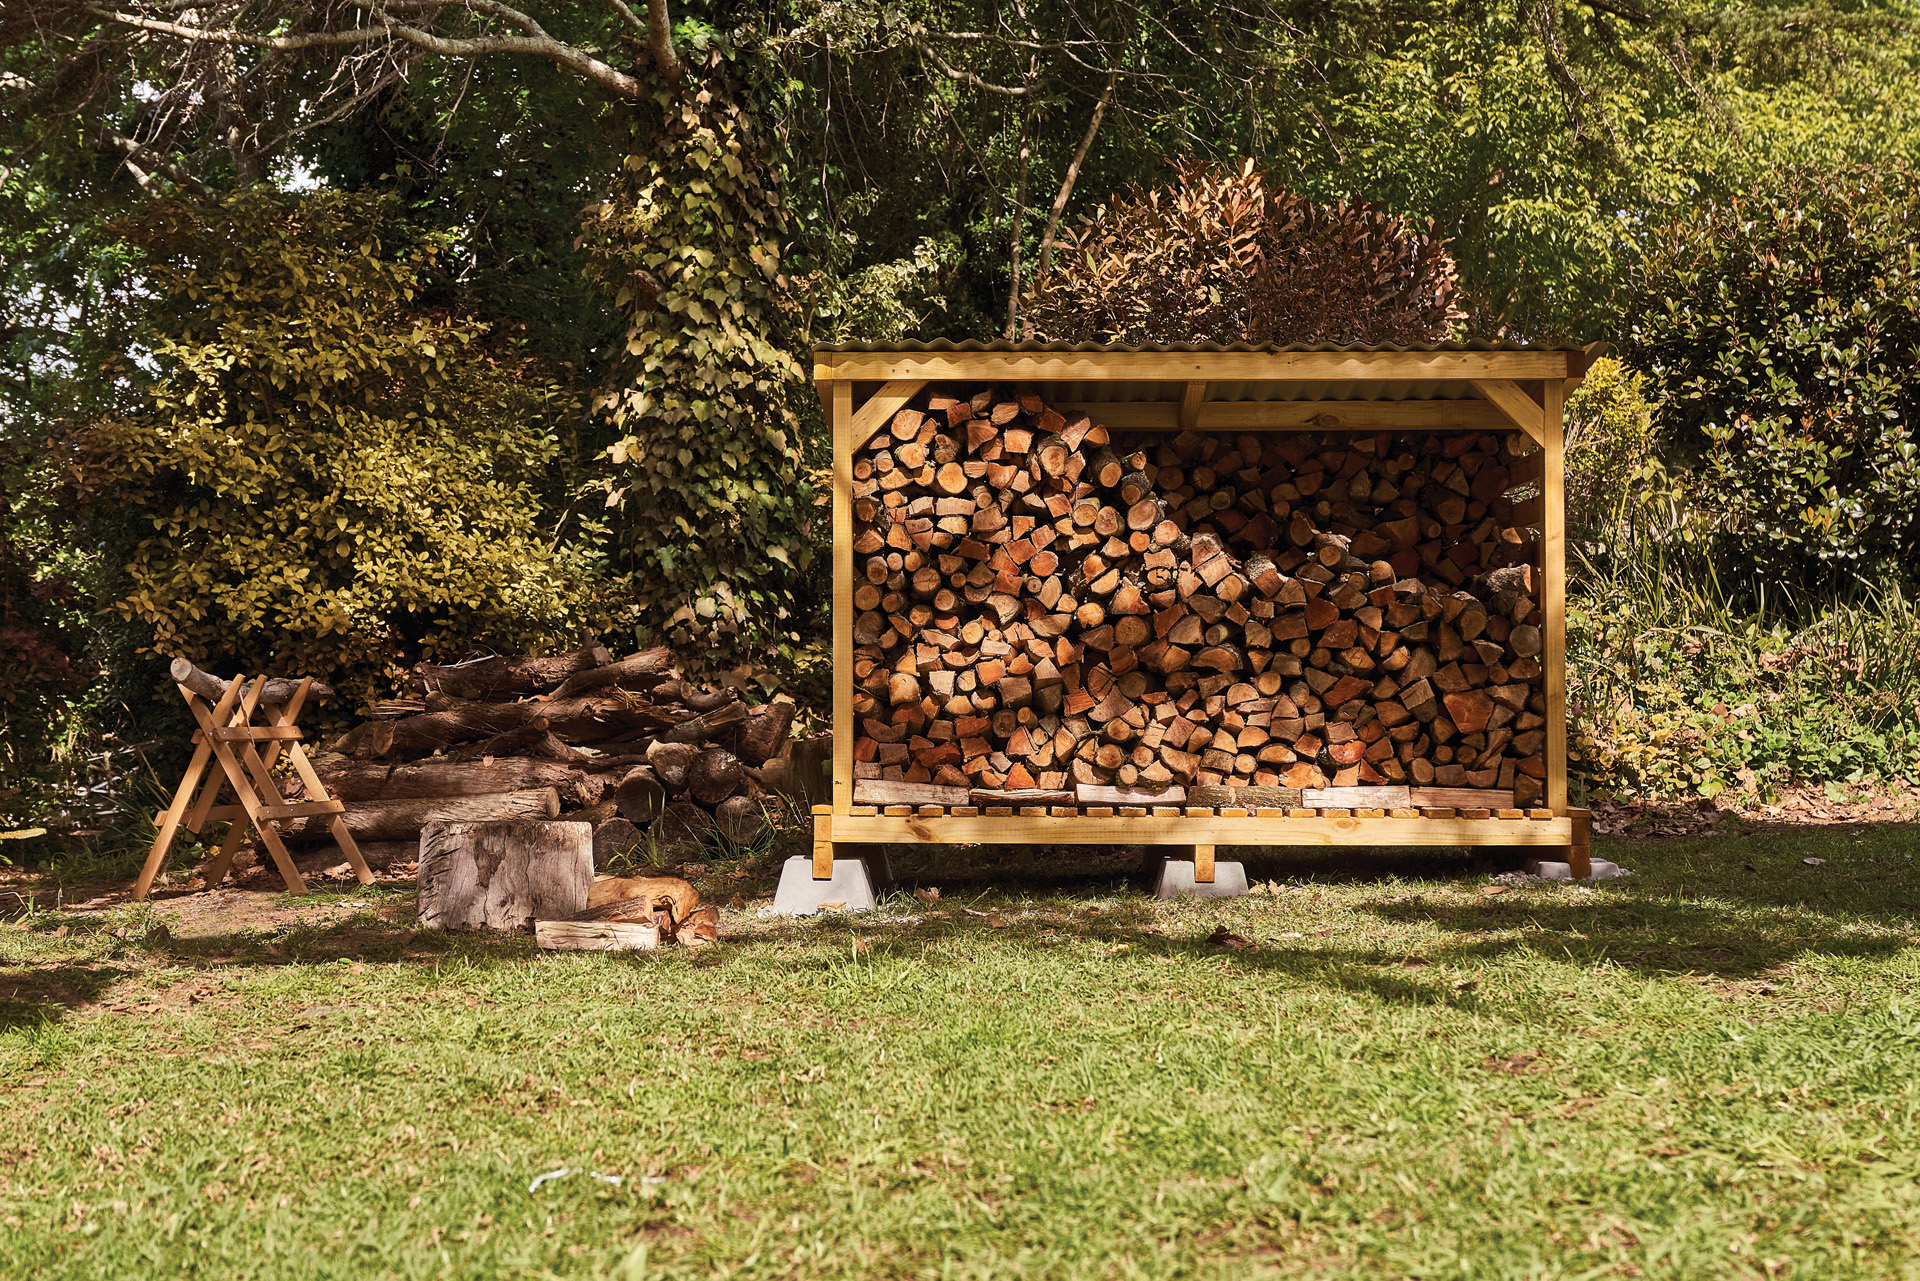 A DIY log store in a garden, filled with properly stacked firewood